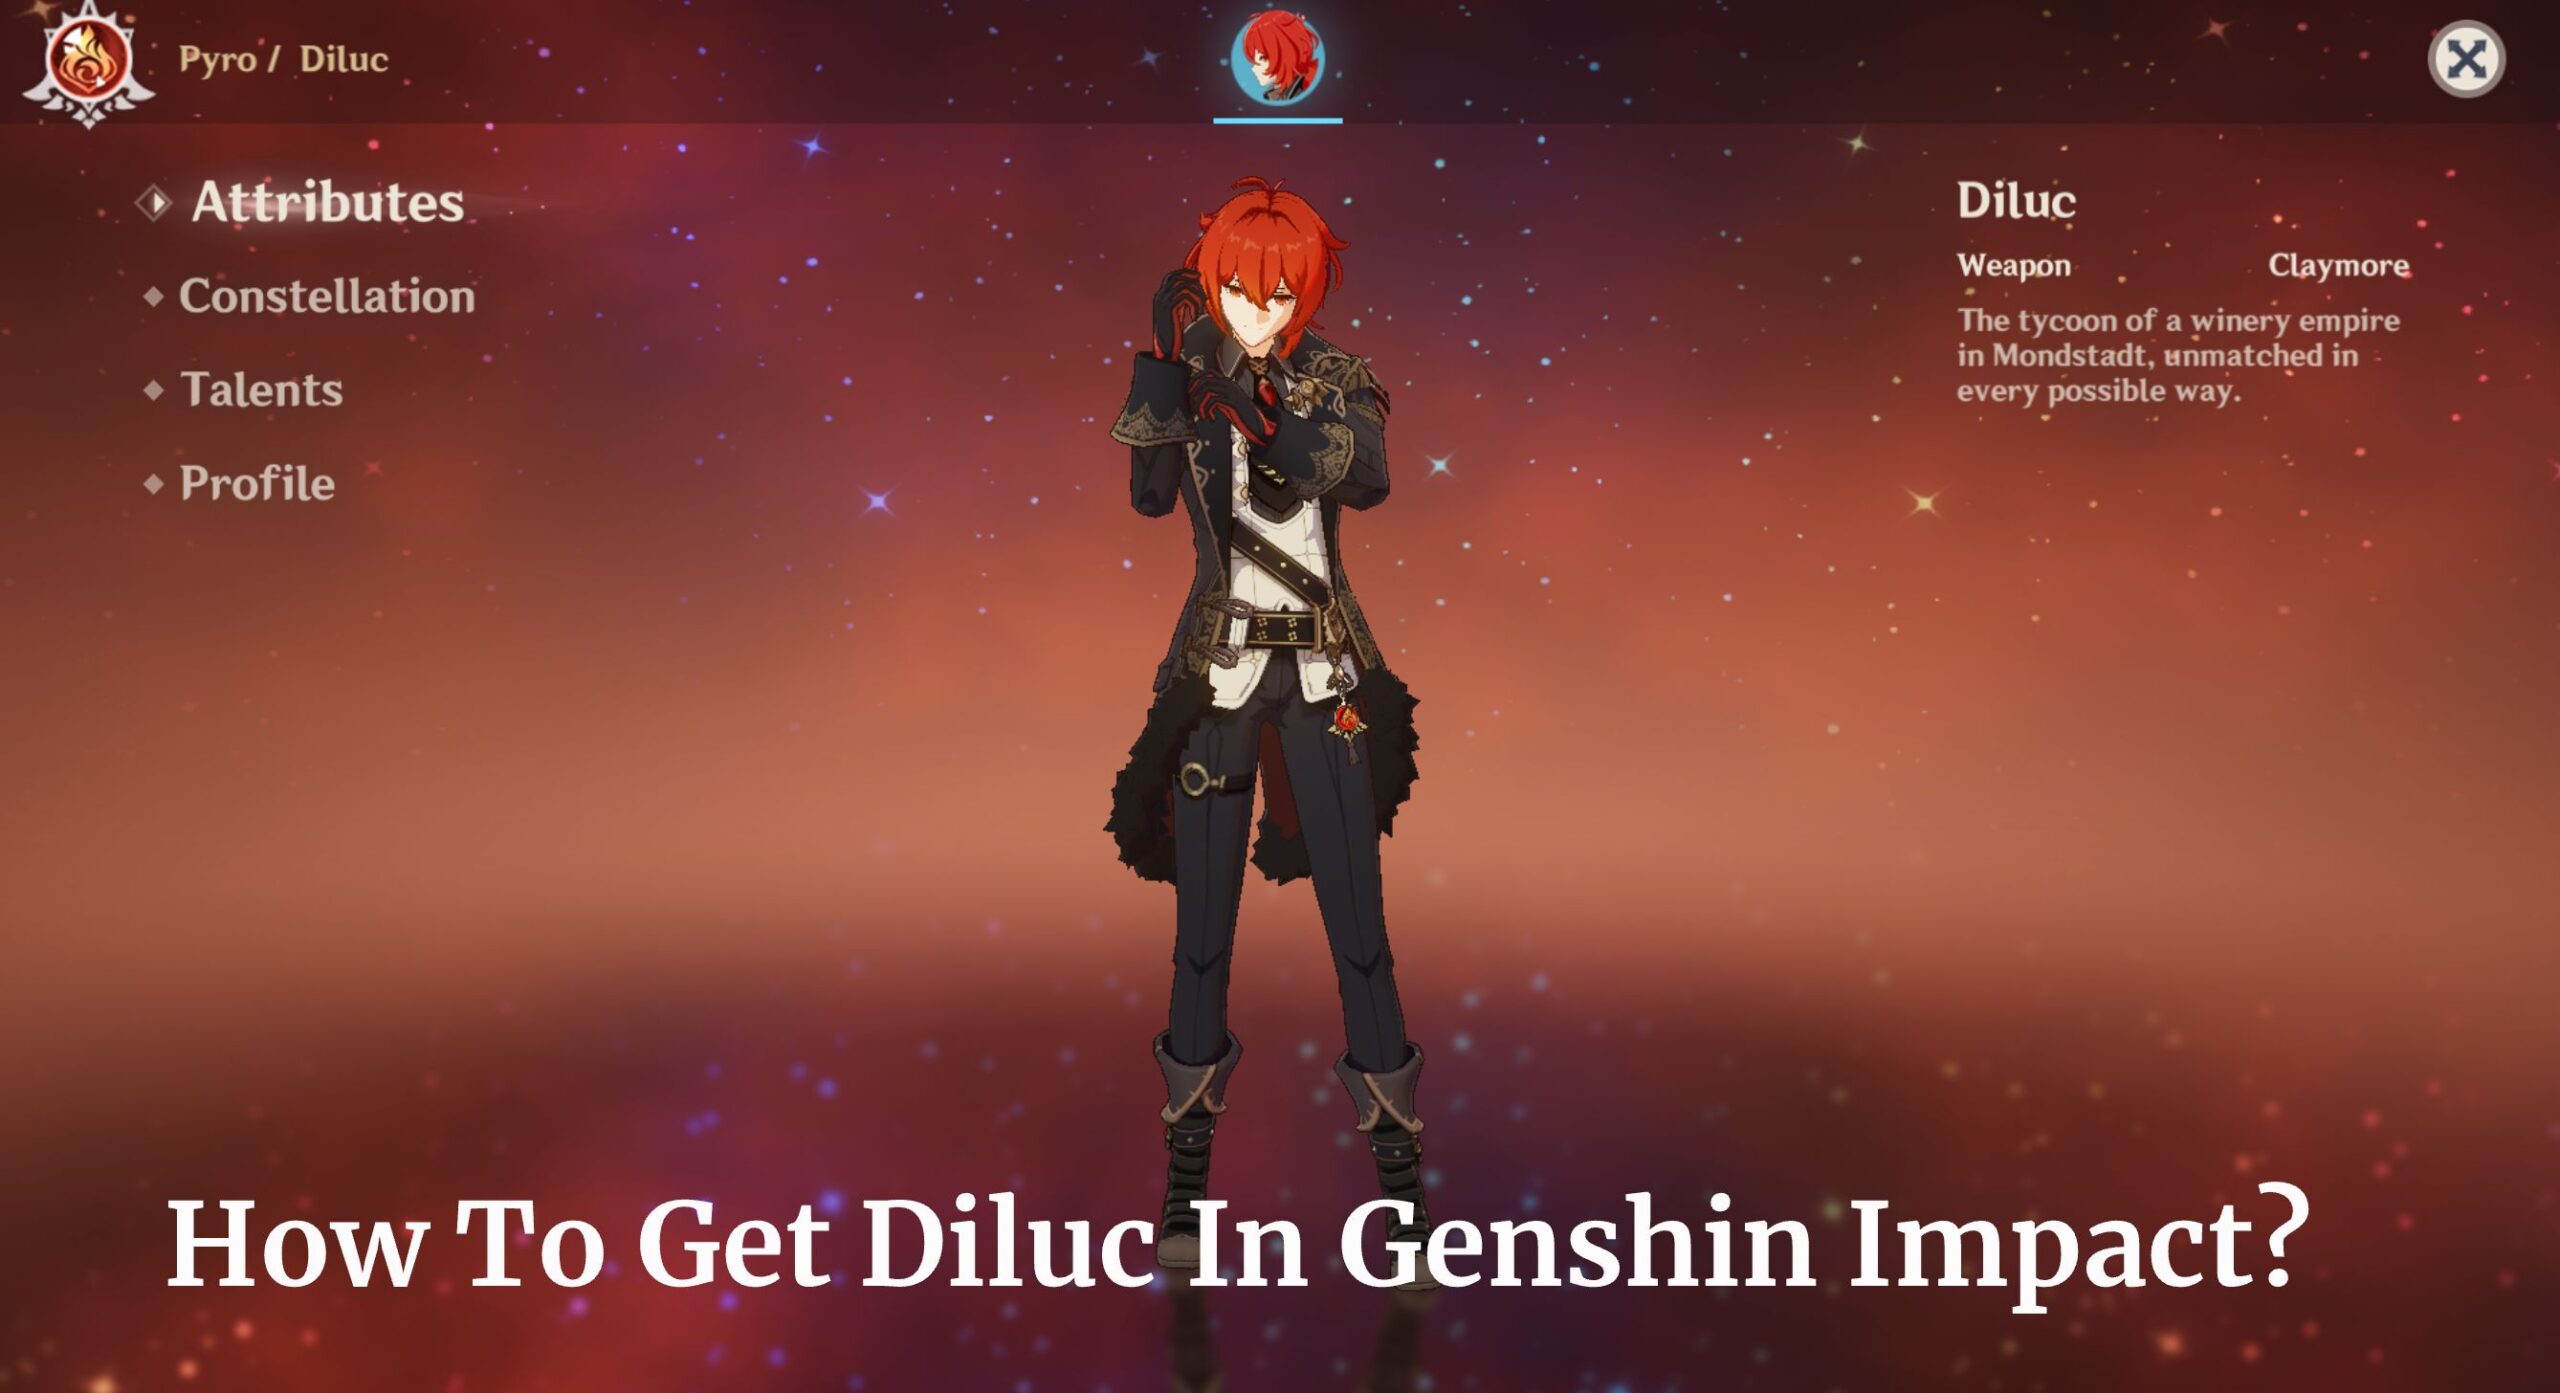 How To Get Diluc In Genshin Impact